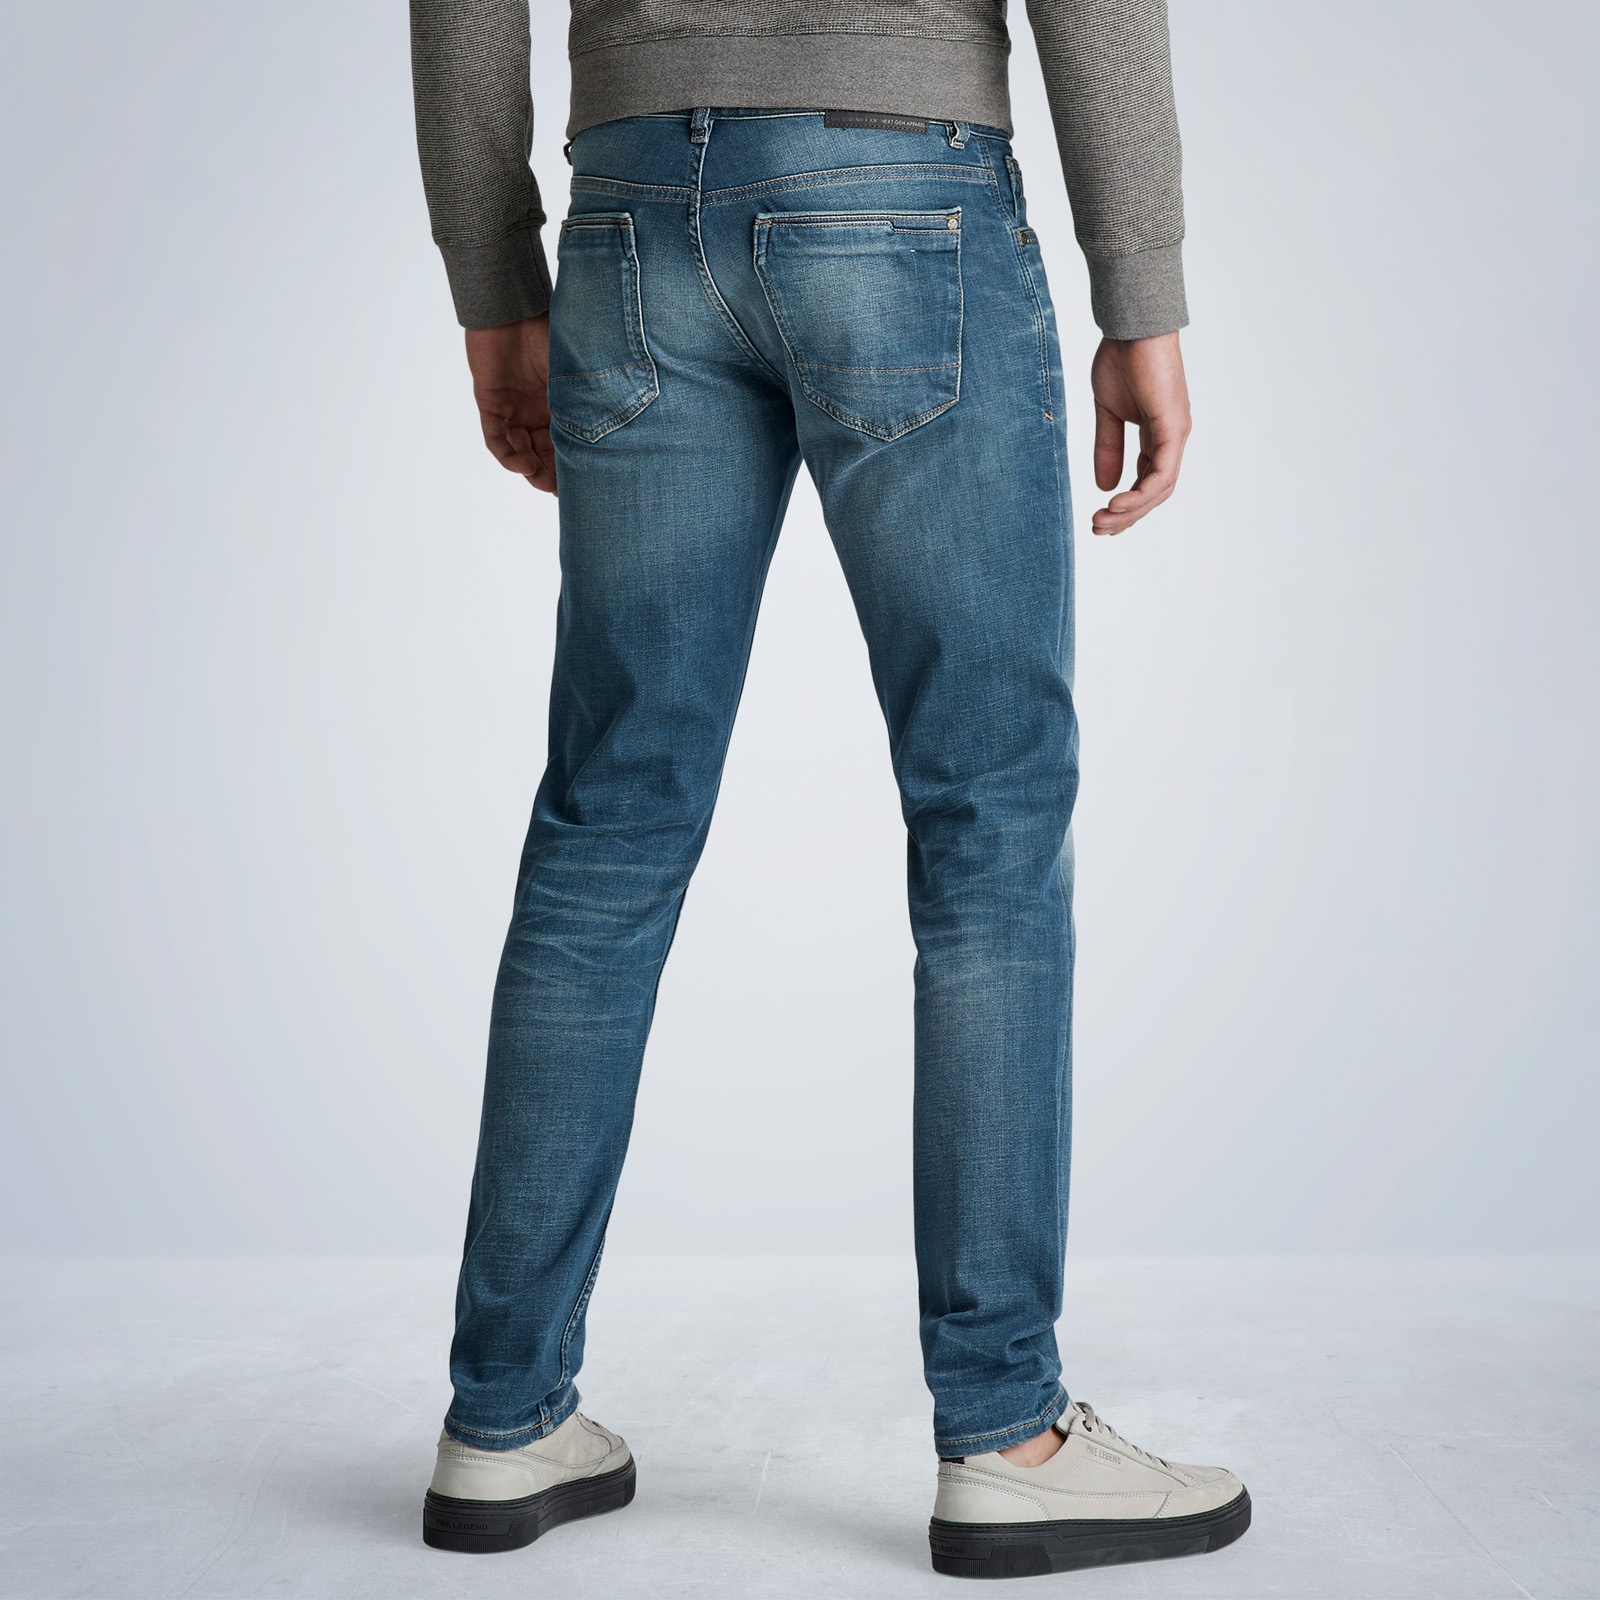 PME LEGEND | XV Denim Jeans | Free shipping and returns